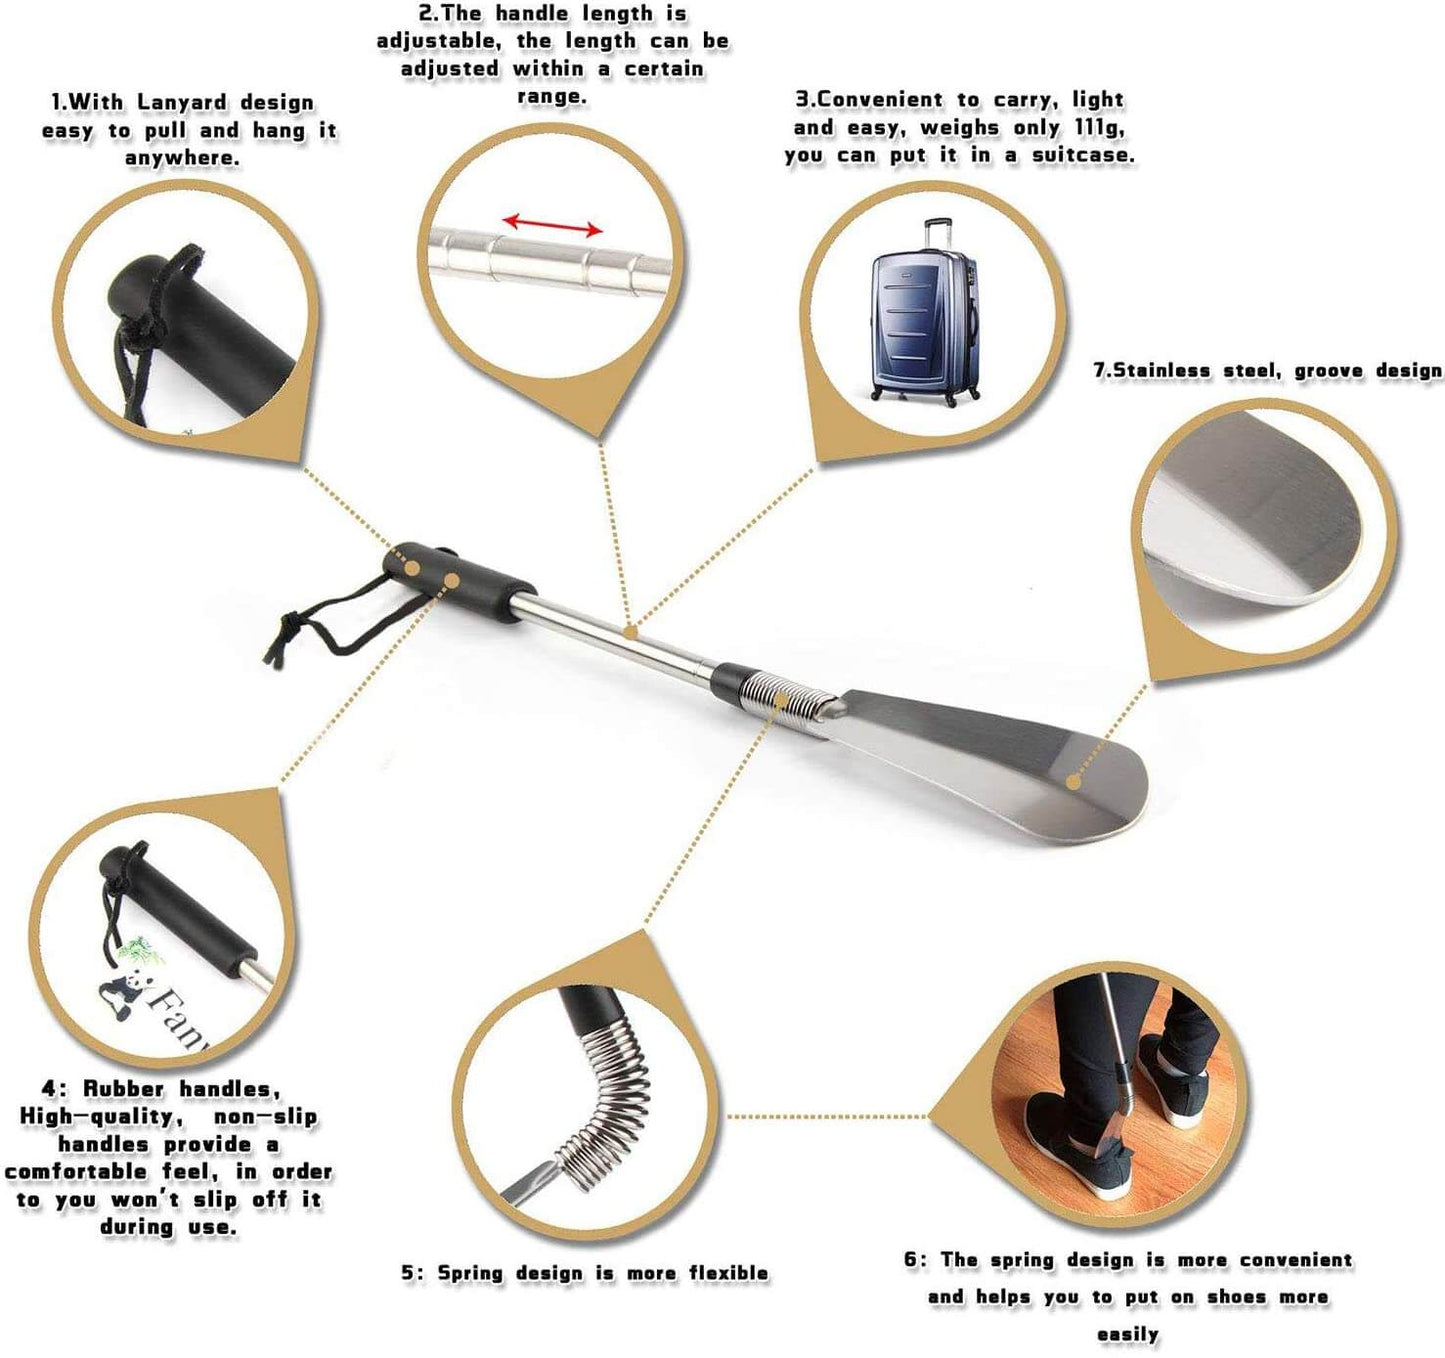 Premium Long Handled Shoe Horn with Telescopic Stainless Steel Expander, product details